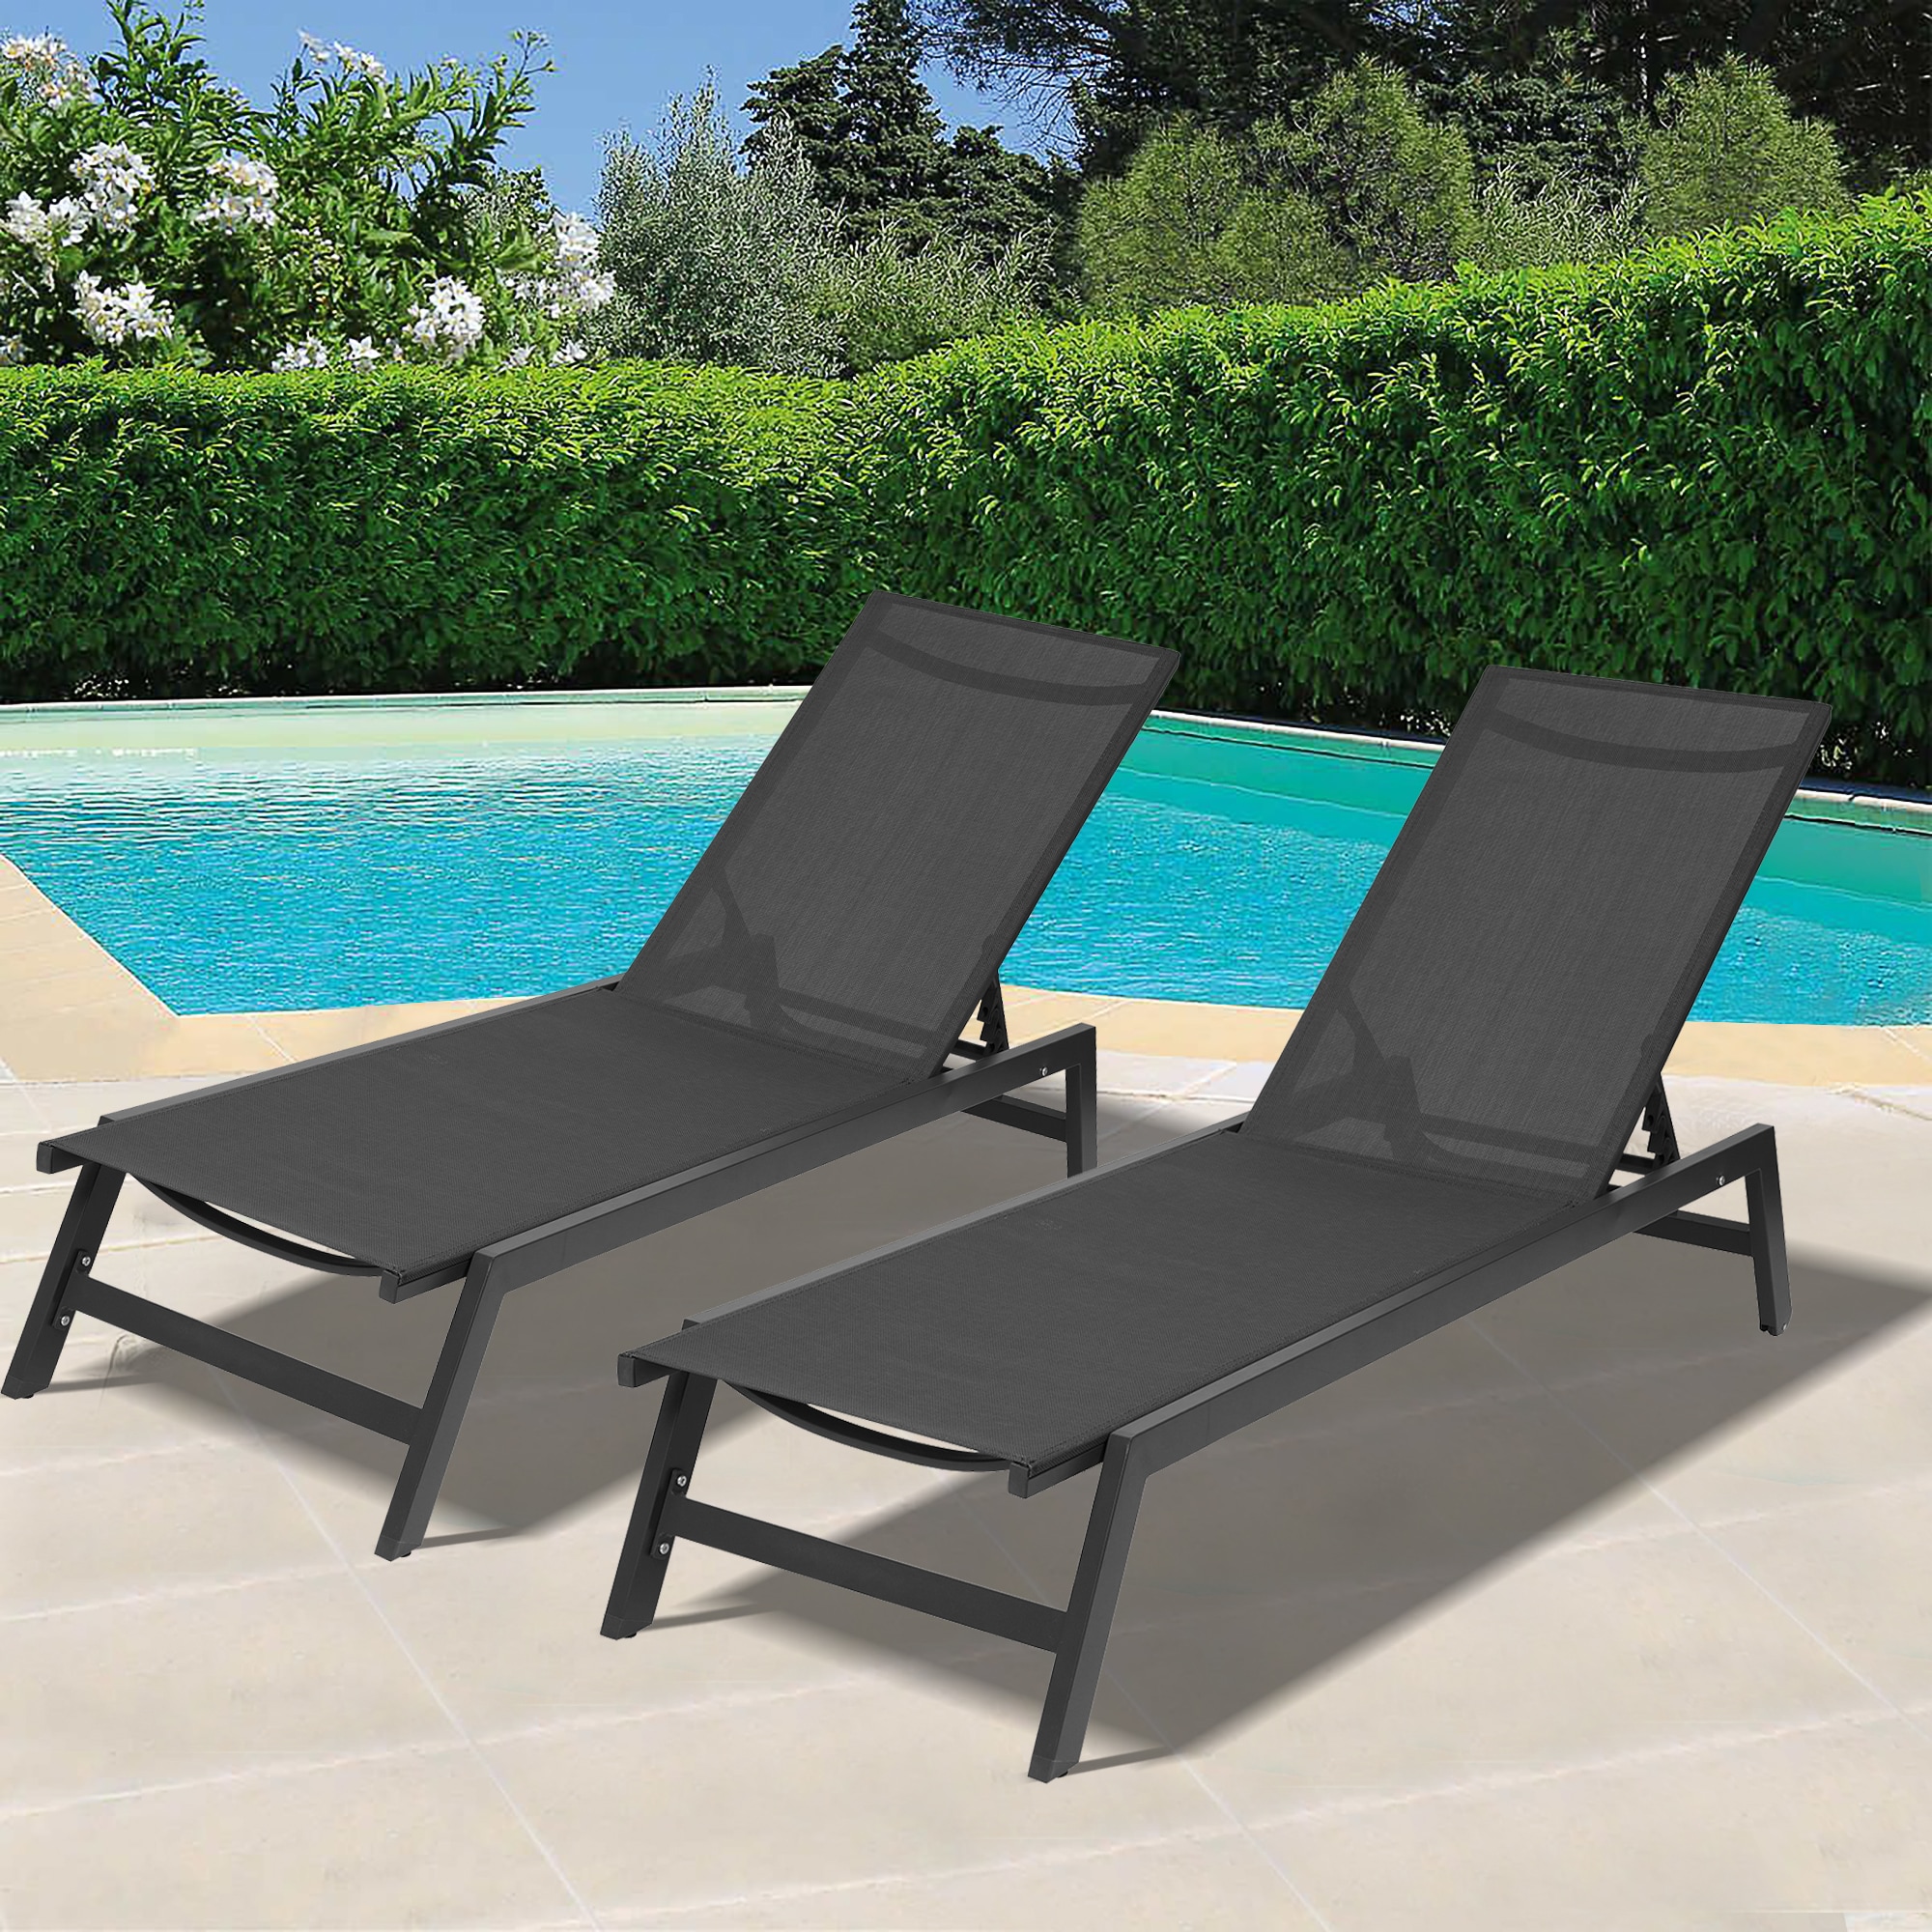 Set of 2 Garden Patio Adjustable Pool Recliner Chaise Lounge Chairs Furniture US 